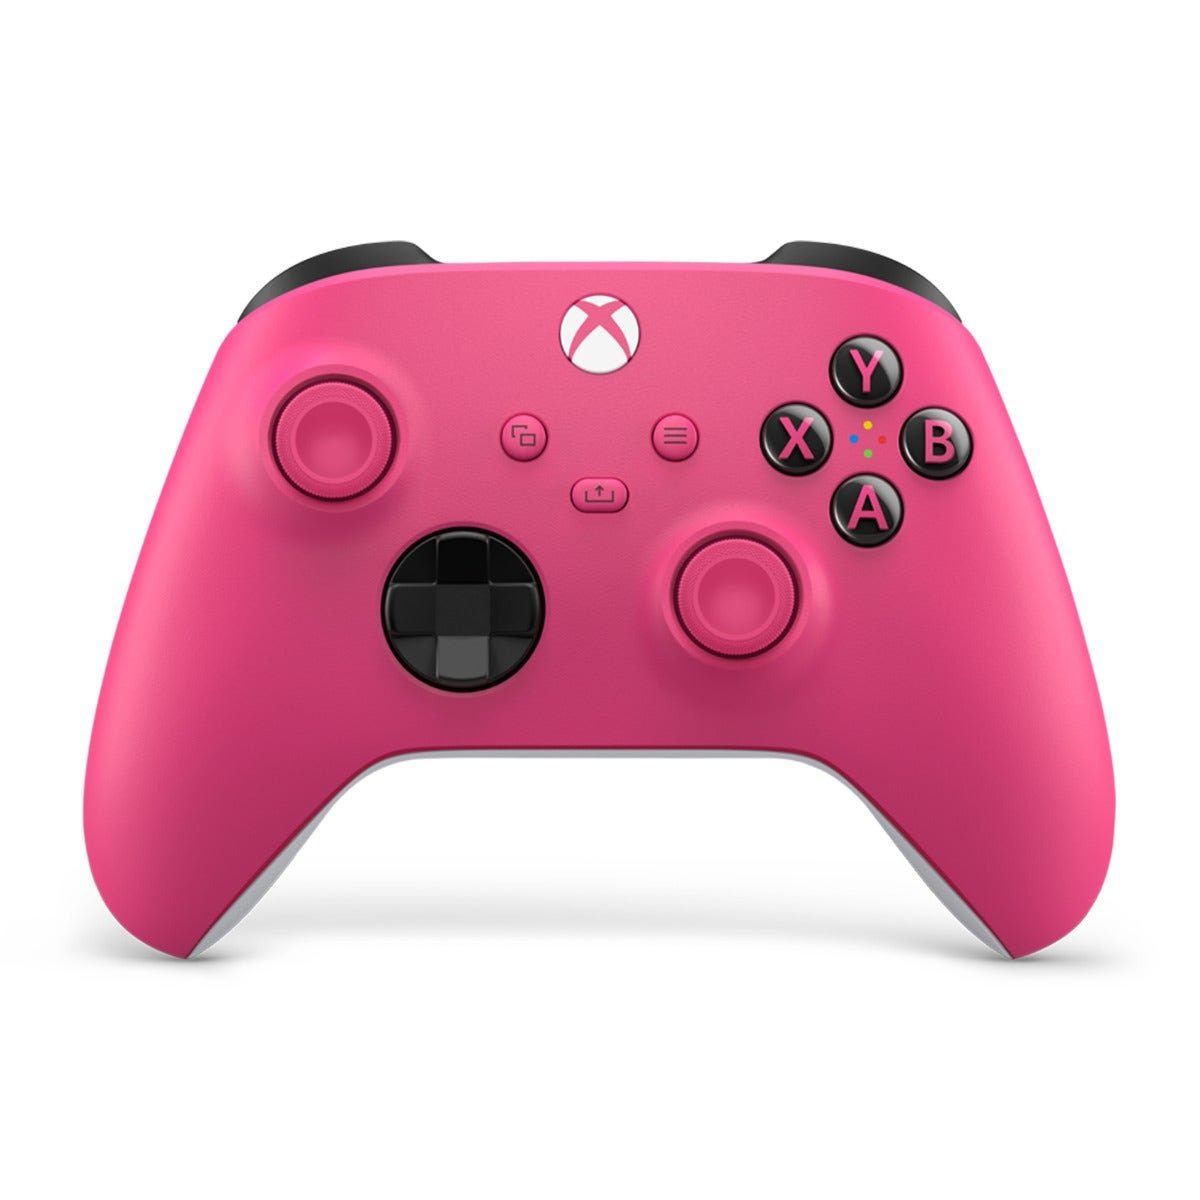 Deep Pink Xbox Wireless Controller - Modern design with improved ergonomics for comfortable gaming. AF-QAU-00083